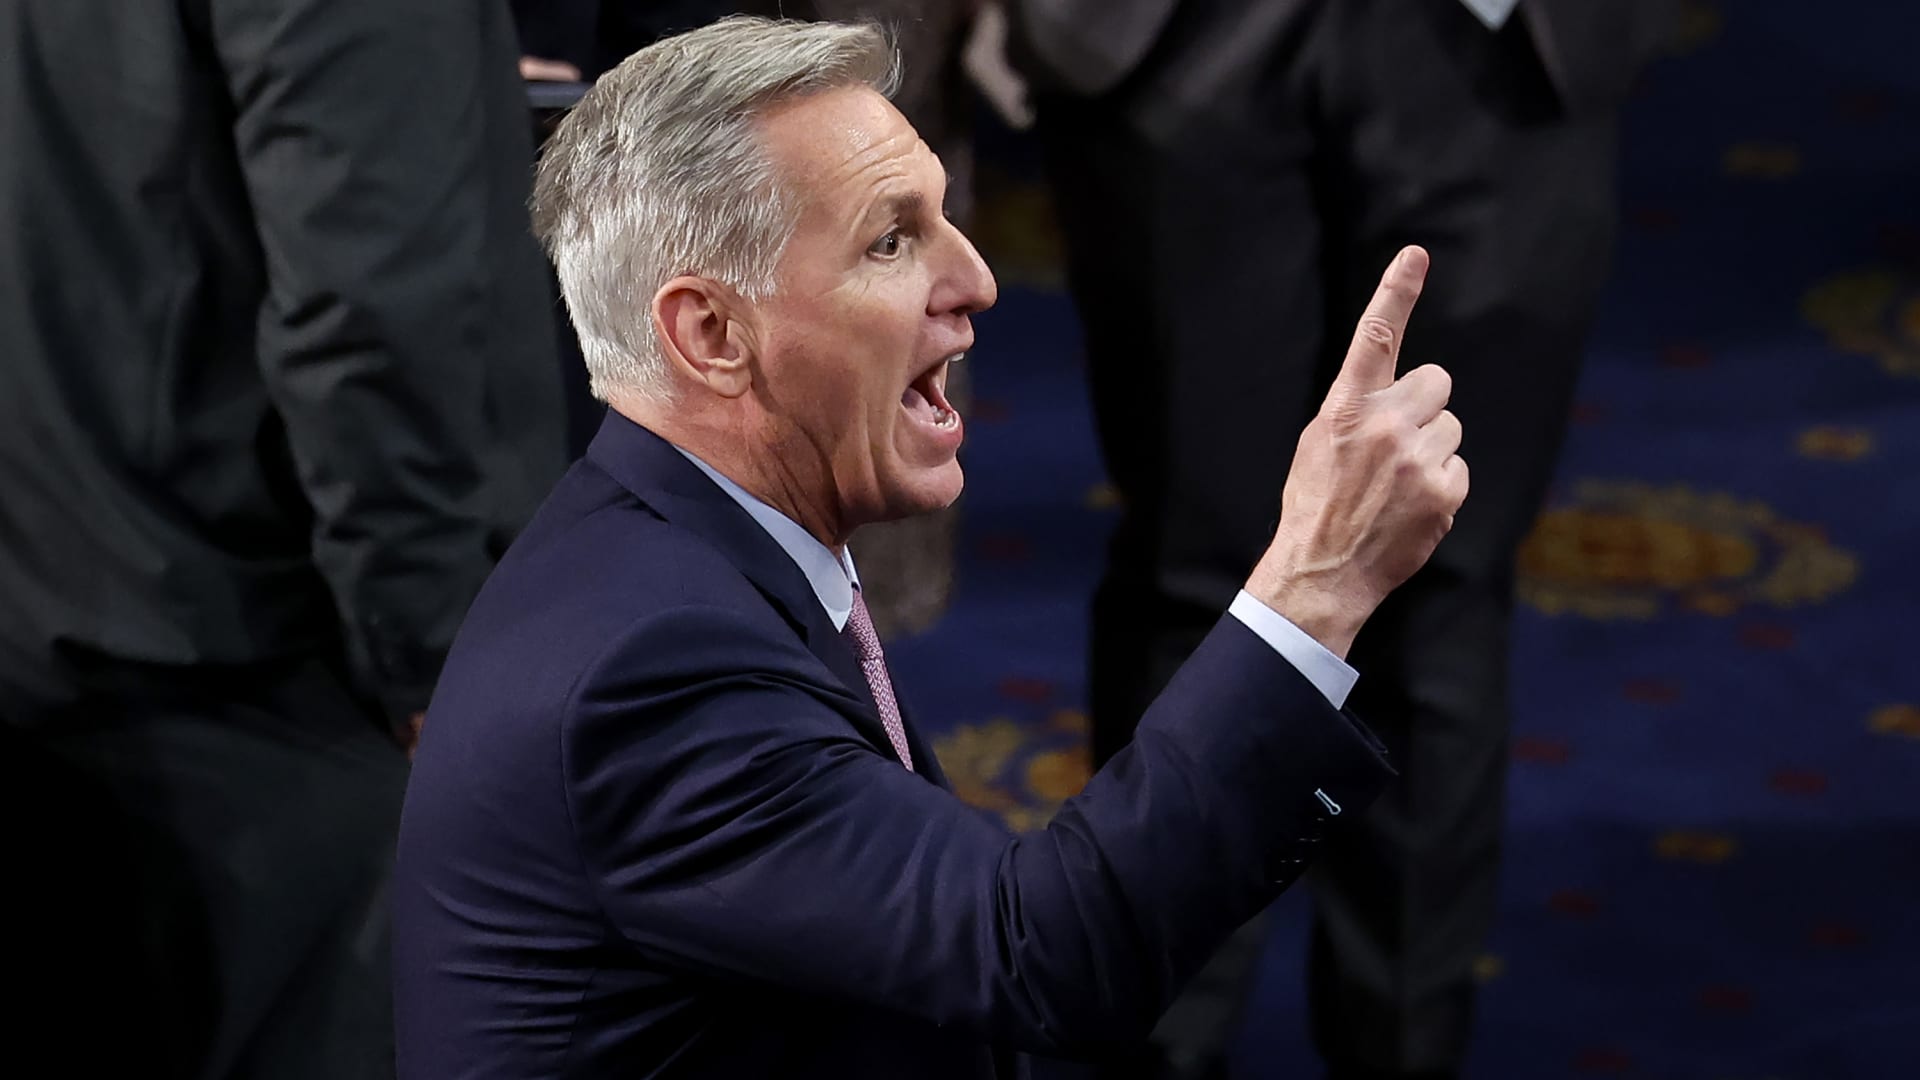 U.S. House Republican Leader Kevin McCarthy (R-CA) calls out in the House Chamber during the 14th vote for Speaker of the House at the U.S. Capitol Building on January 06, 2023 in Washington, DC.